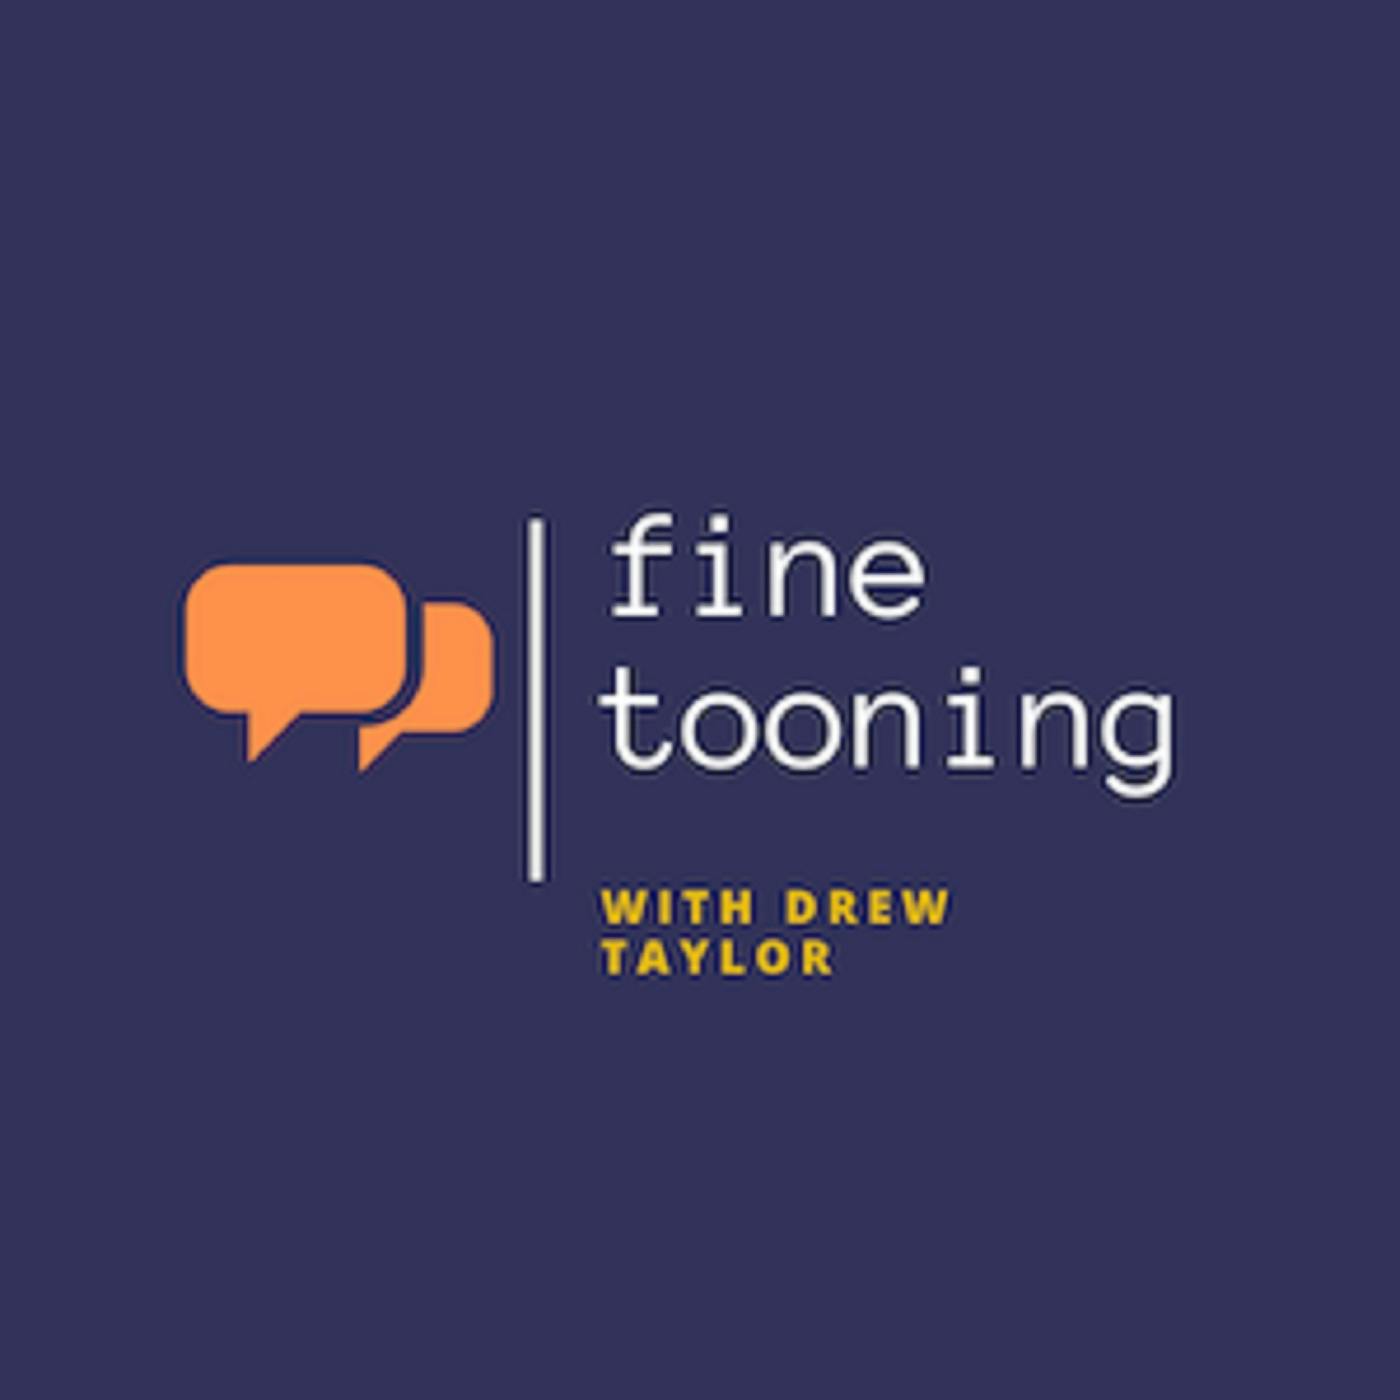 Fine Tooning with Drew Taylor - Episode 197: DreamWorks Animation preps a “Bad Guys” holiday special